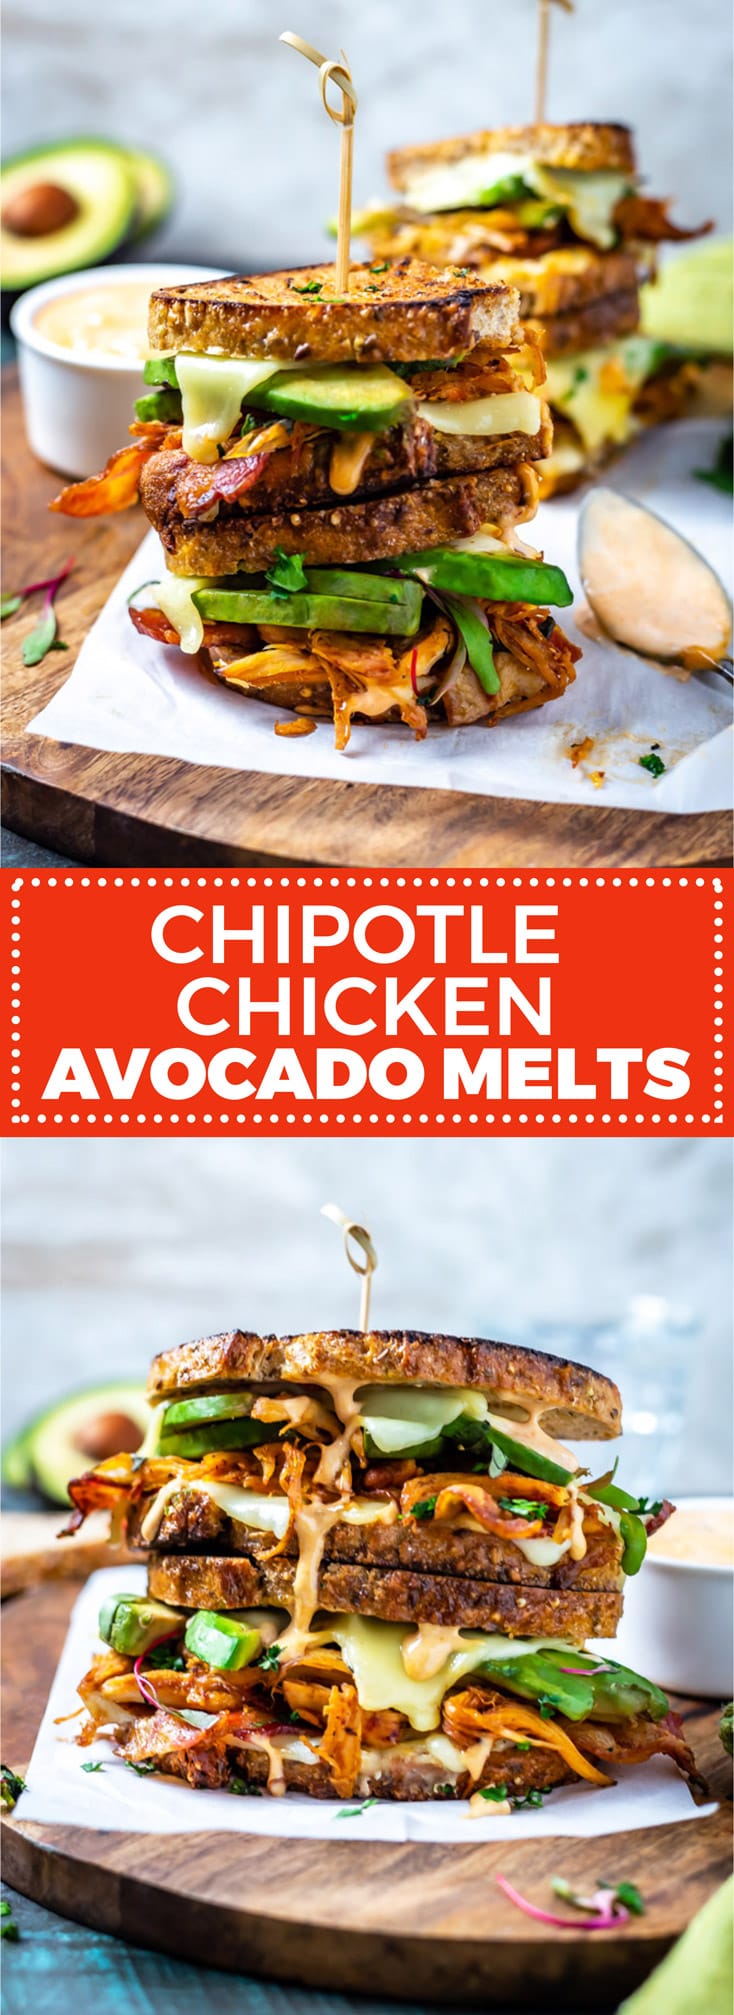 Chipotle Chicken Avocado Melts. These sandwiches include flavorful shredded chicken, melted Deli American, creamy avocado, bacon, chipotle mayo, and crisp buttery bread. | hostthetoast.com #ad #feedfeed #landolakes